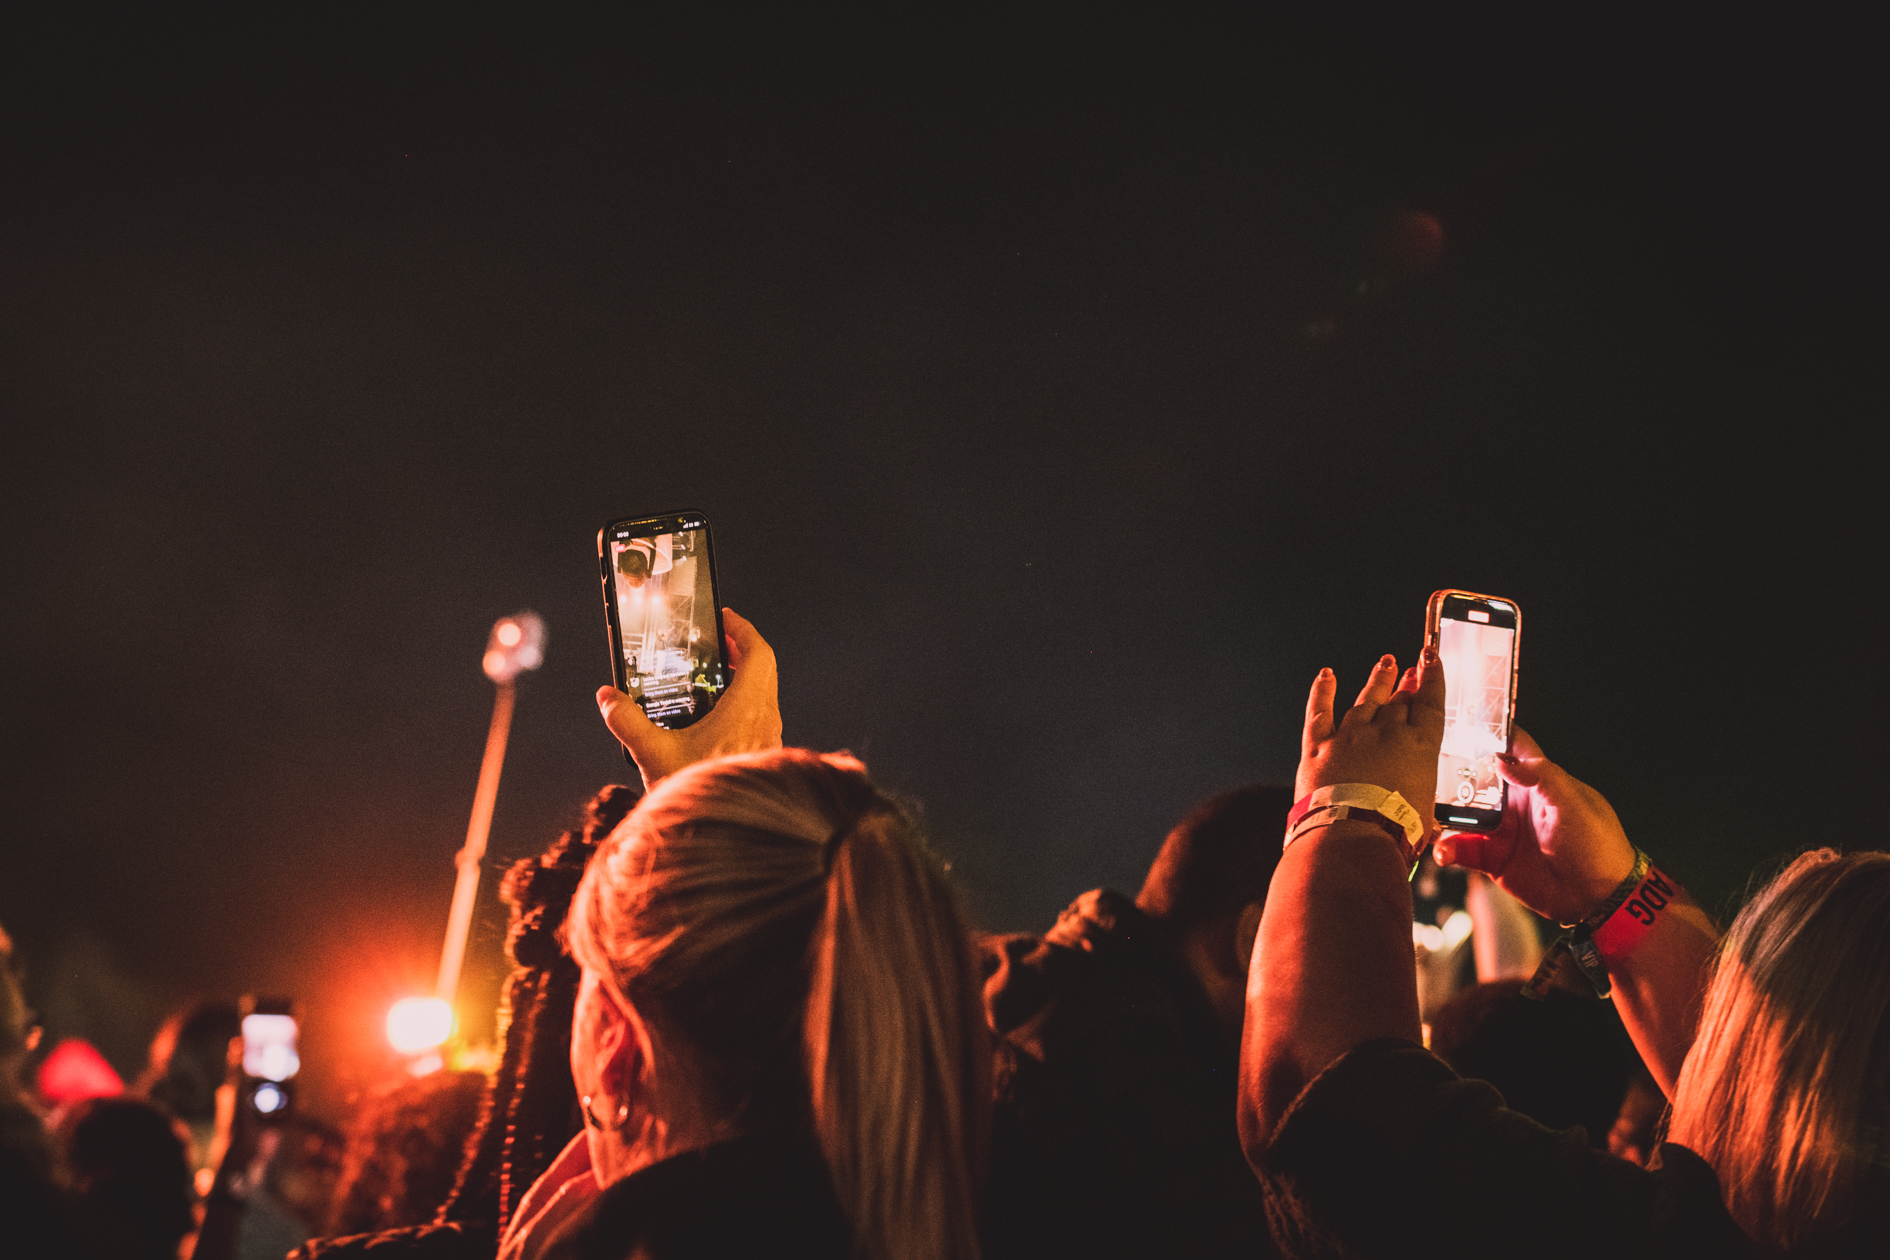 Get updates on the festival, in the app